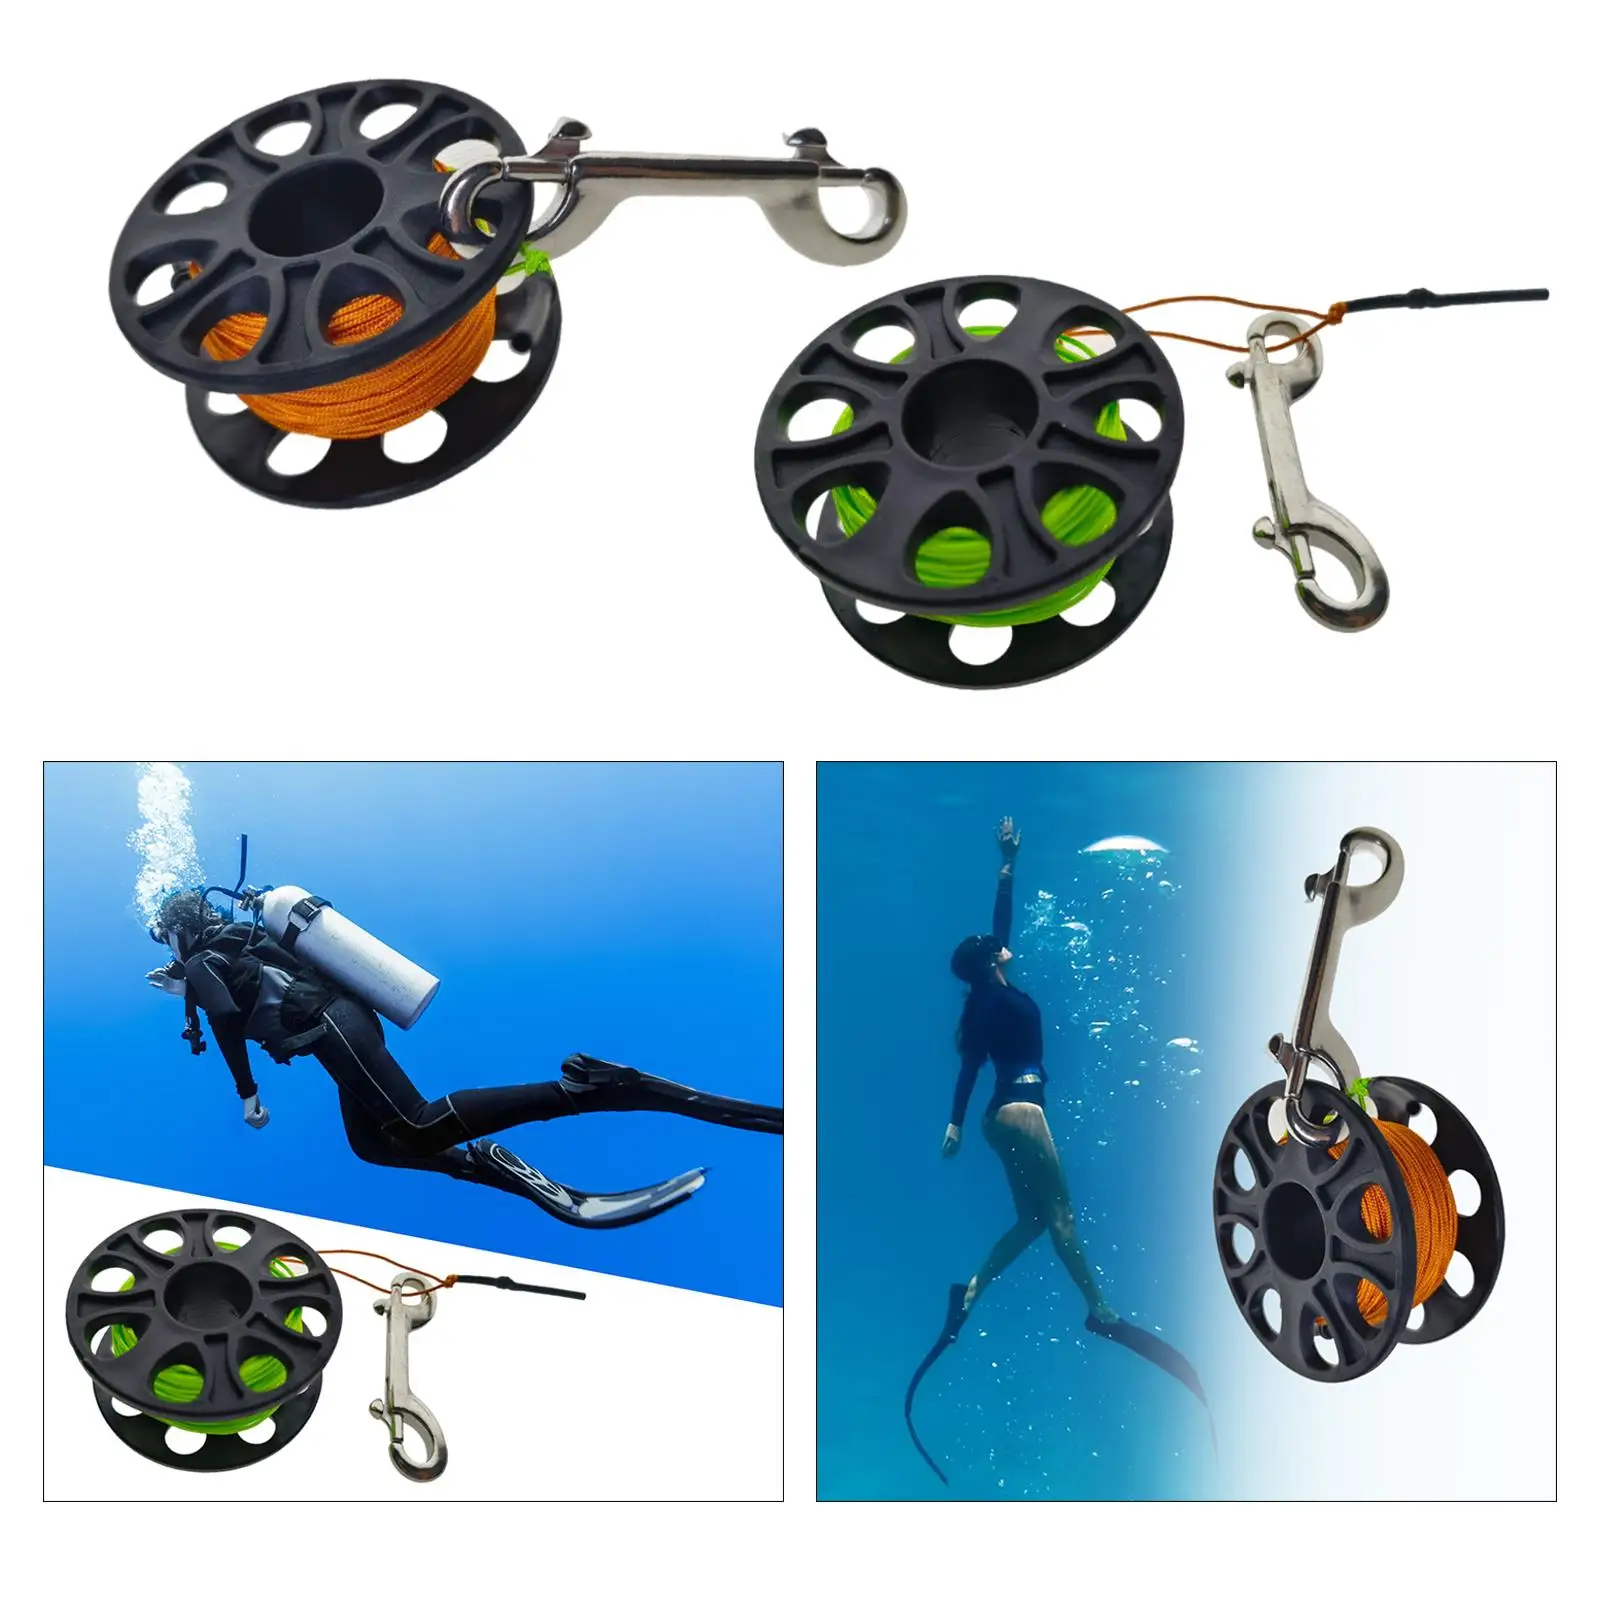 Diving Finger Reel Scuba Diving Finger Spool Compact for Outdoor Activities Free Diving Snorkeling Scuba Diving Technical Diving